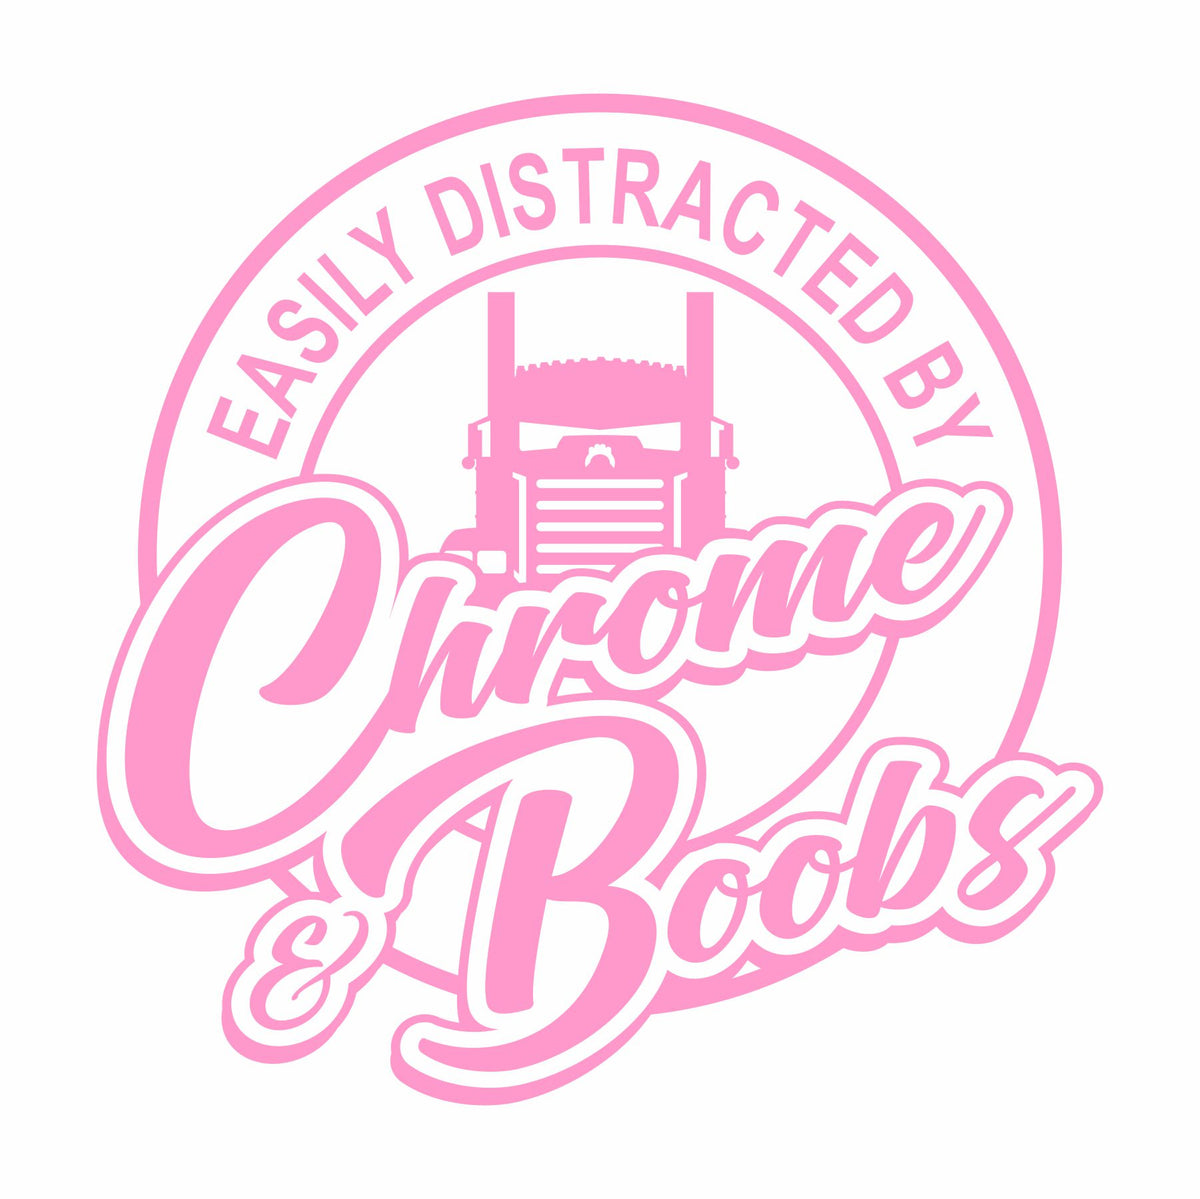 Easily Distracted by Chrome & Boobs - KW - Vinyl Decal - Free Shipping